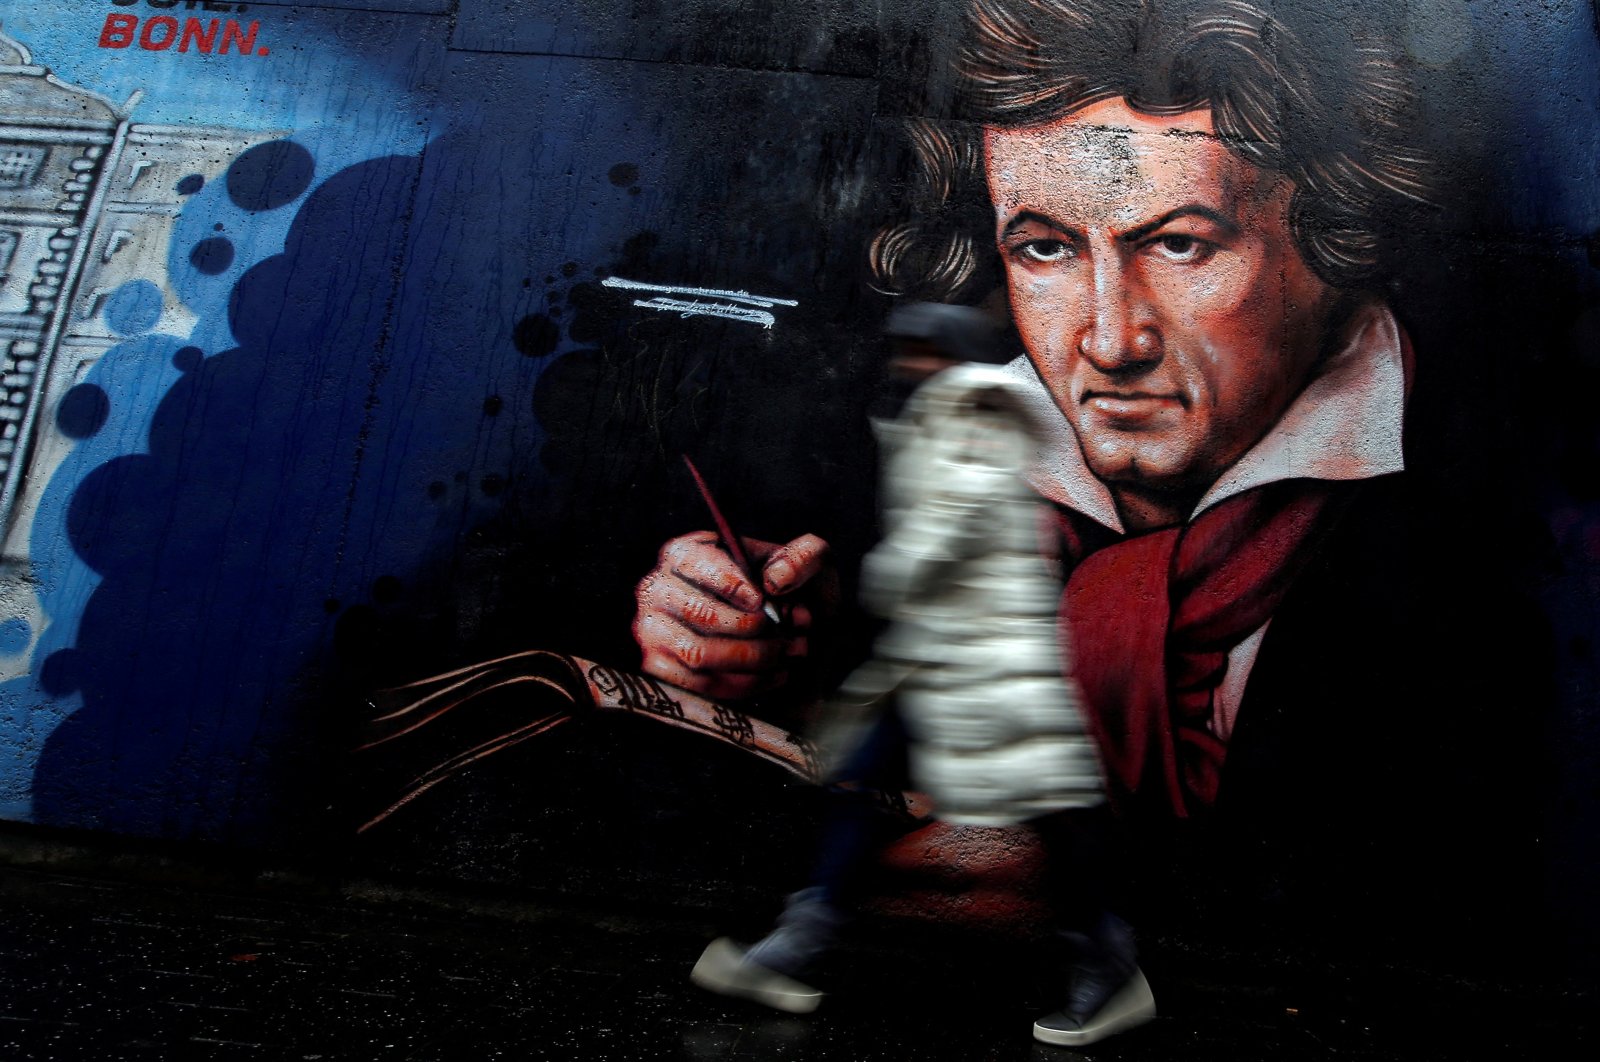 A mural of Ludwig van Beethoven is seen in a pedestrian tunnel ahead of his 250th birth anniversary in Bonn, Germany, Dec. 13, 2019. (Reuters Photo)